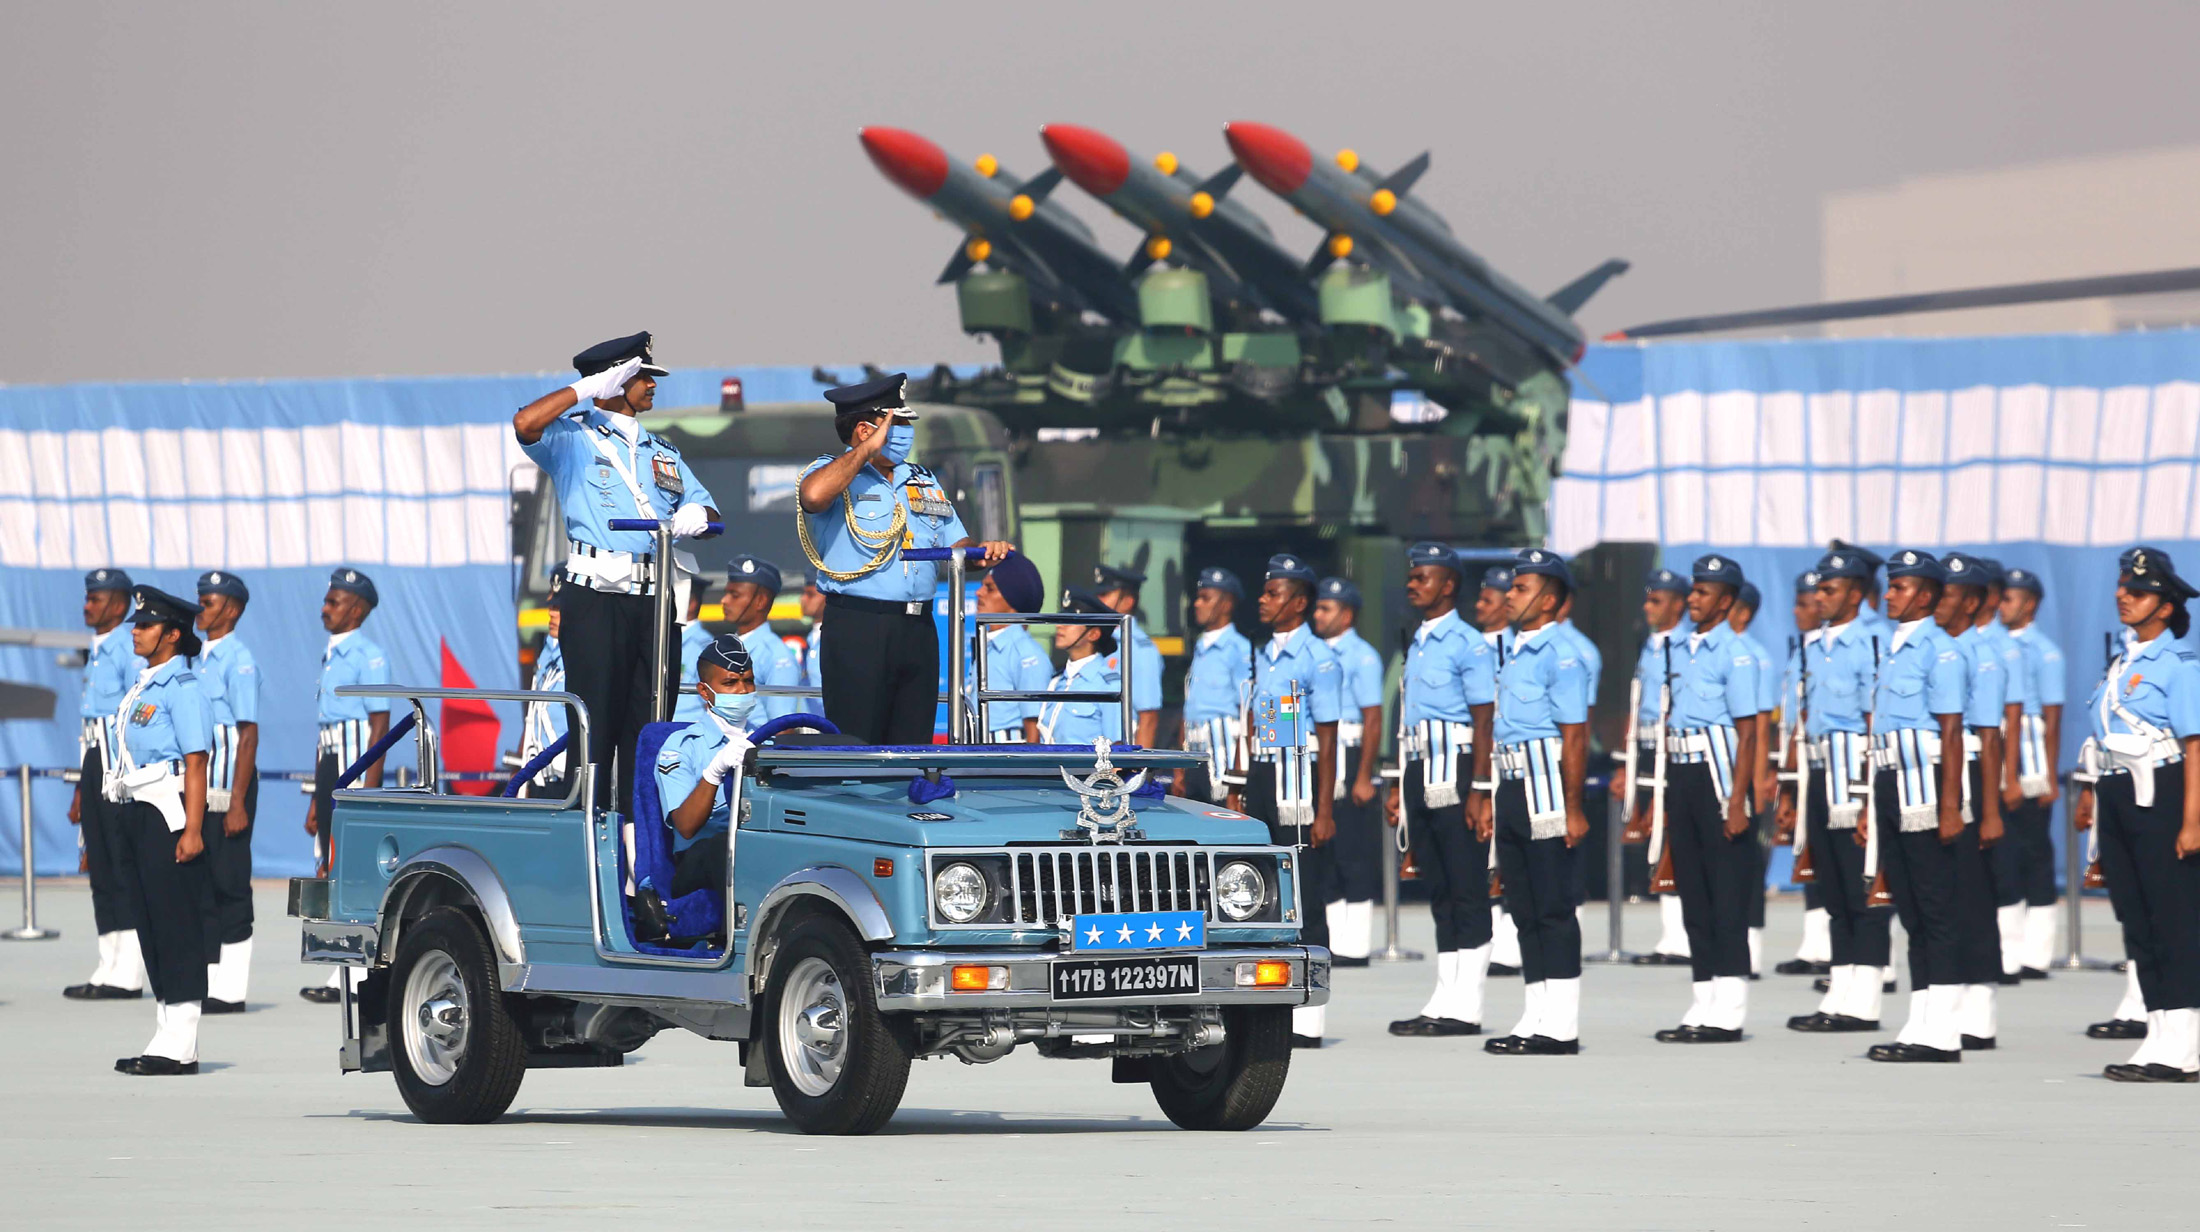 Glimpse of the Indian Air Force Day Parade 2020